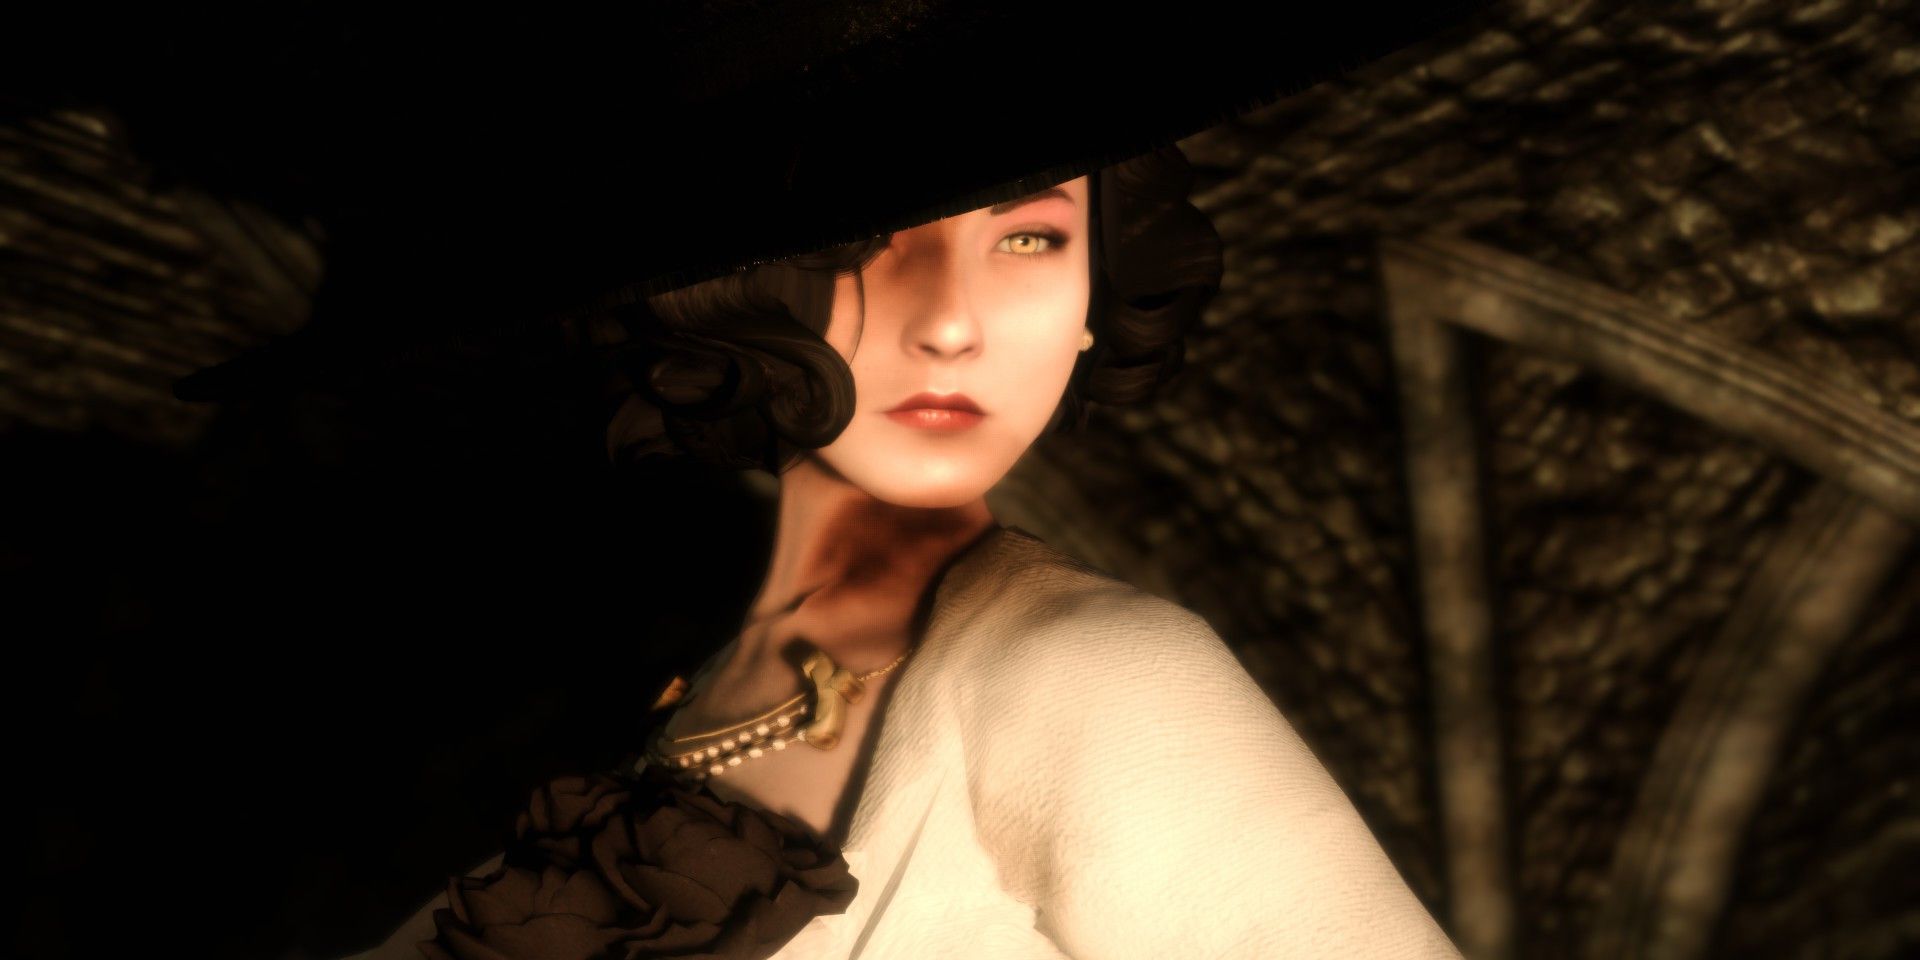 Resident Evil Village’s Lady Dimitrescu Comes To Skyrim In New Mod